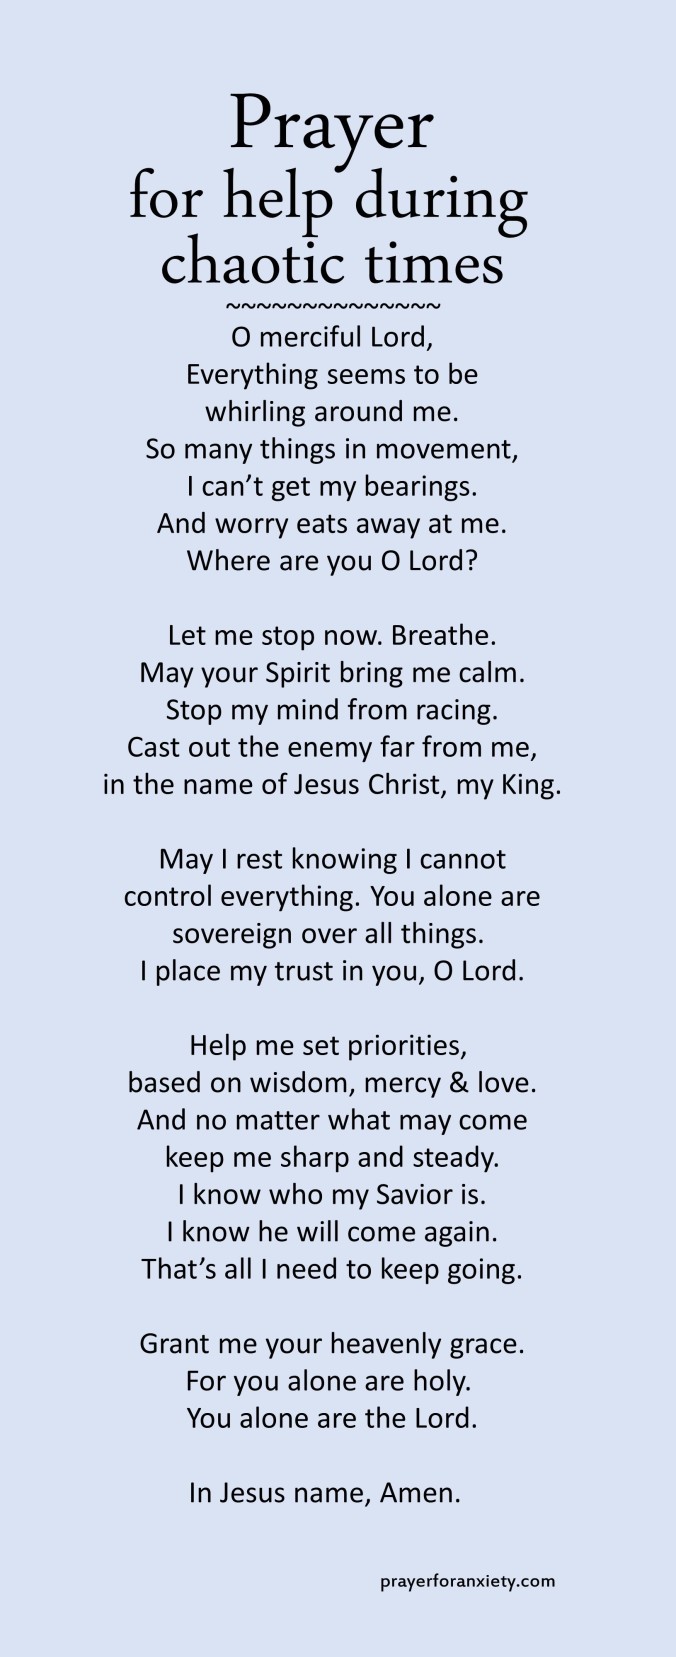 Prayer for help during chaotic times